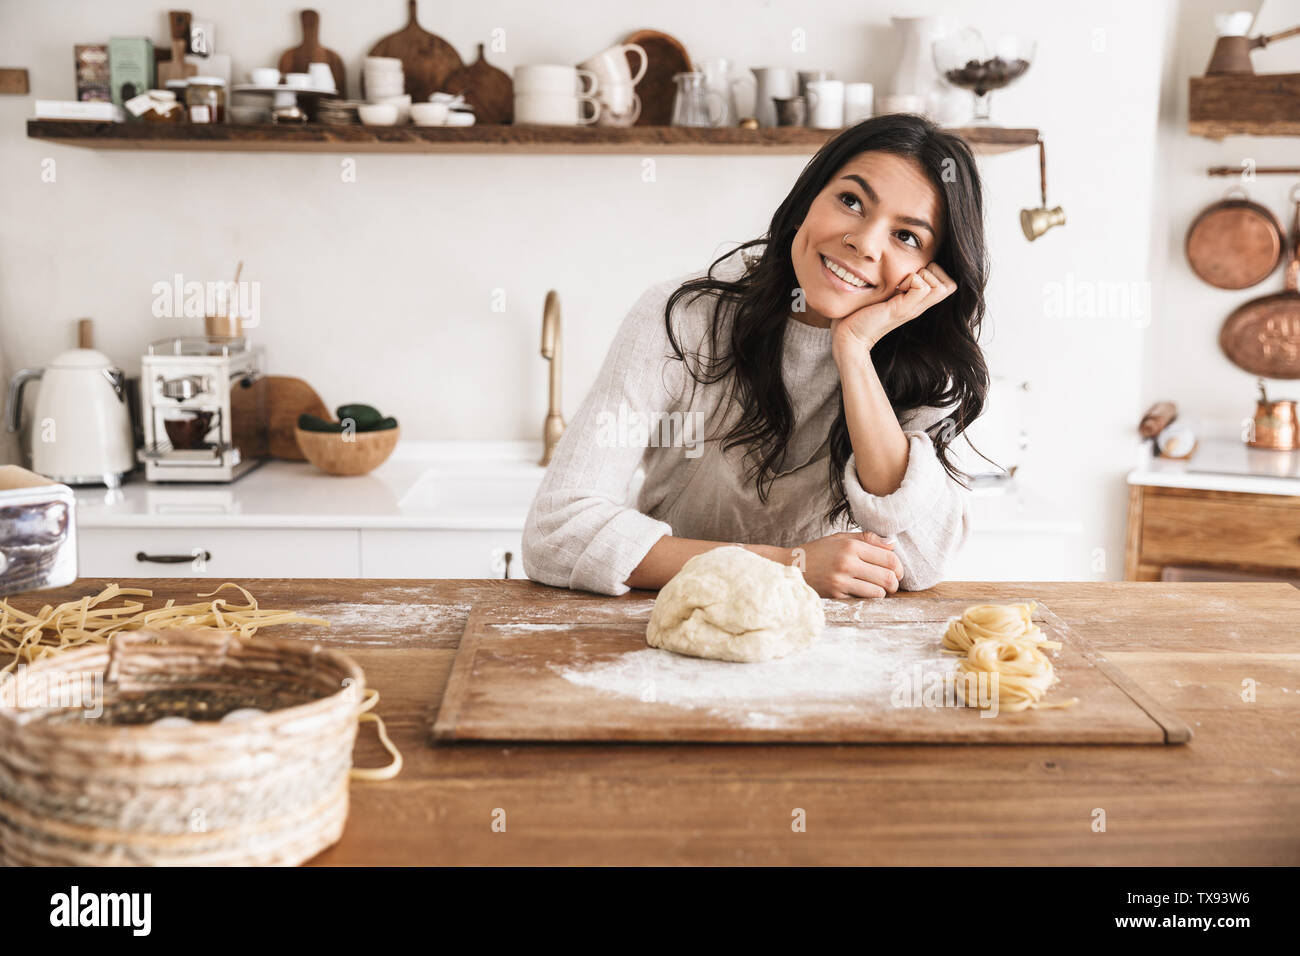 Portrait of smiling european woman 30s wearing apron cooking and making homemade pasta of dough in kitchen at home Stock Photo